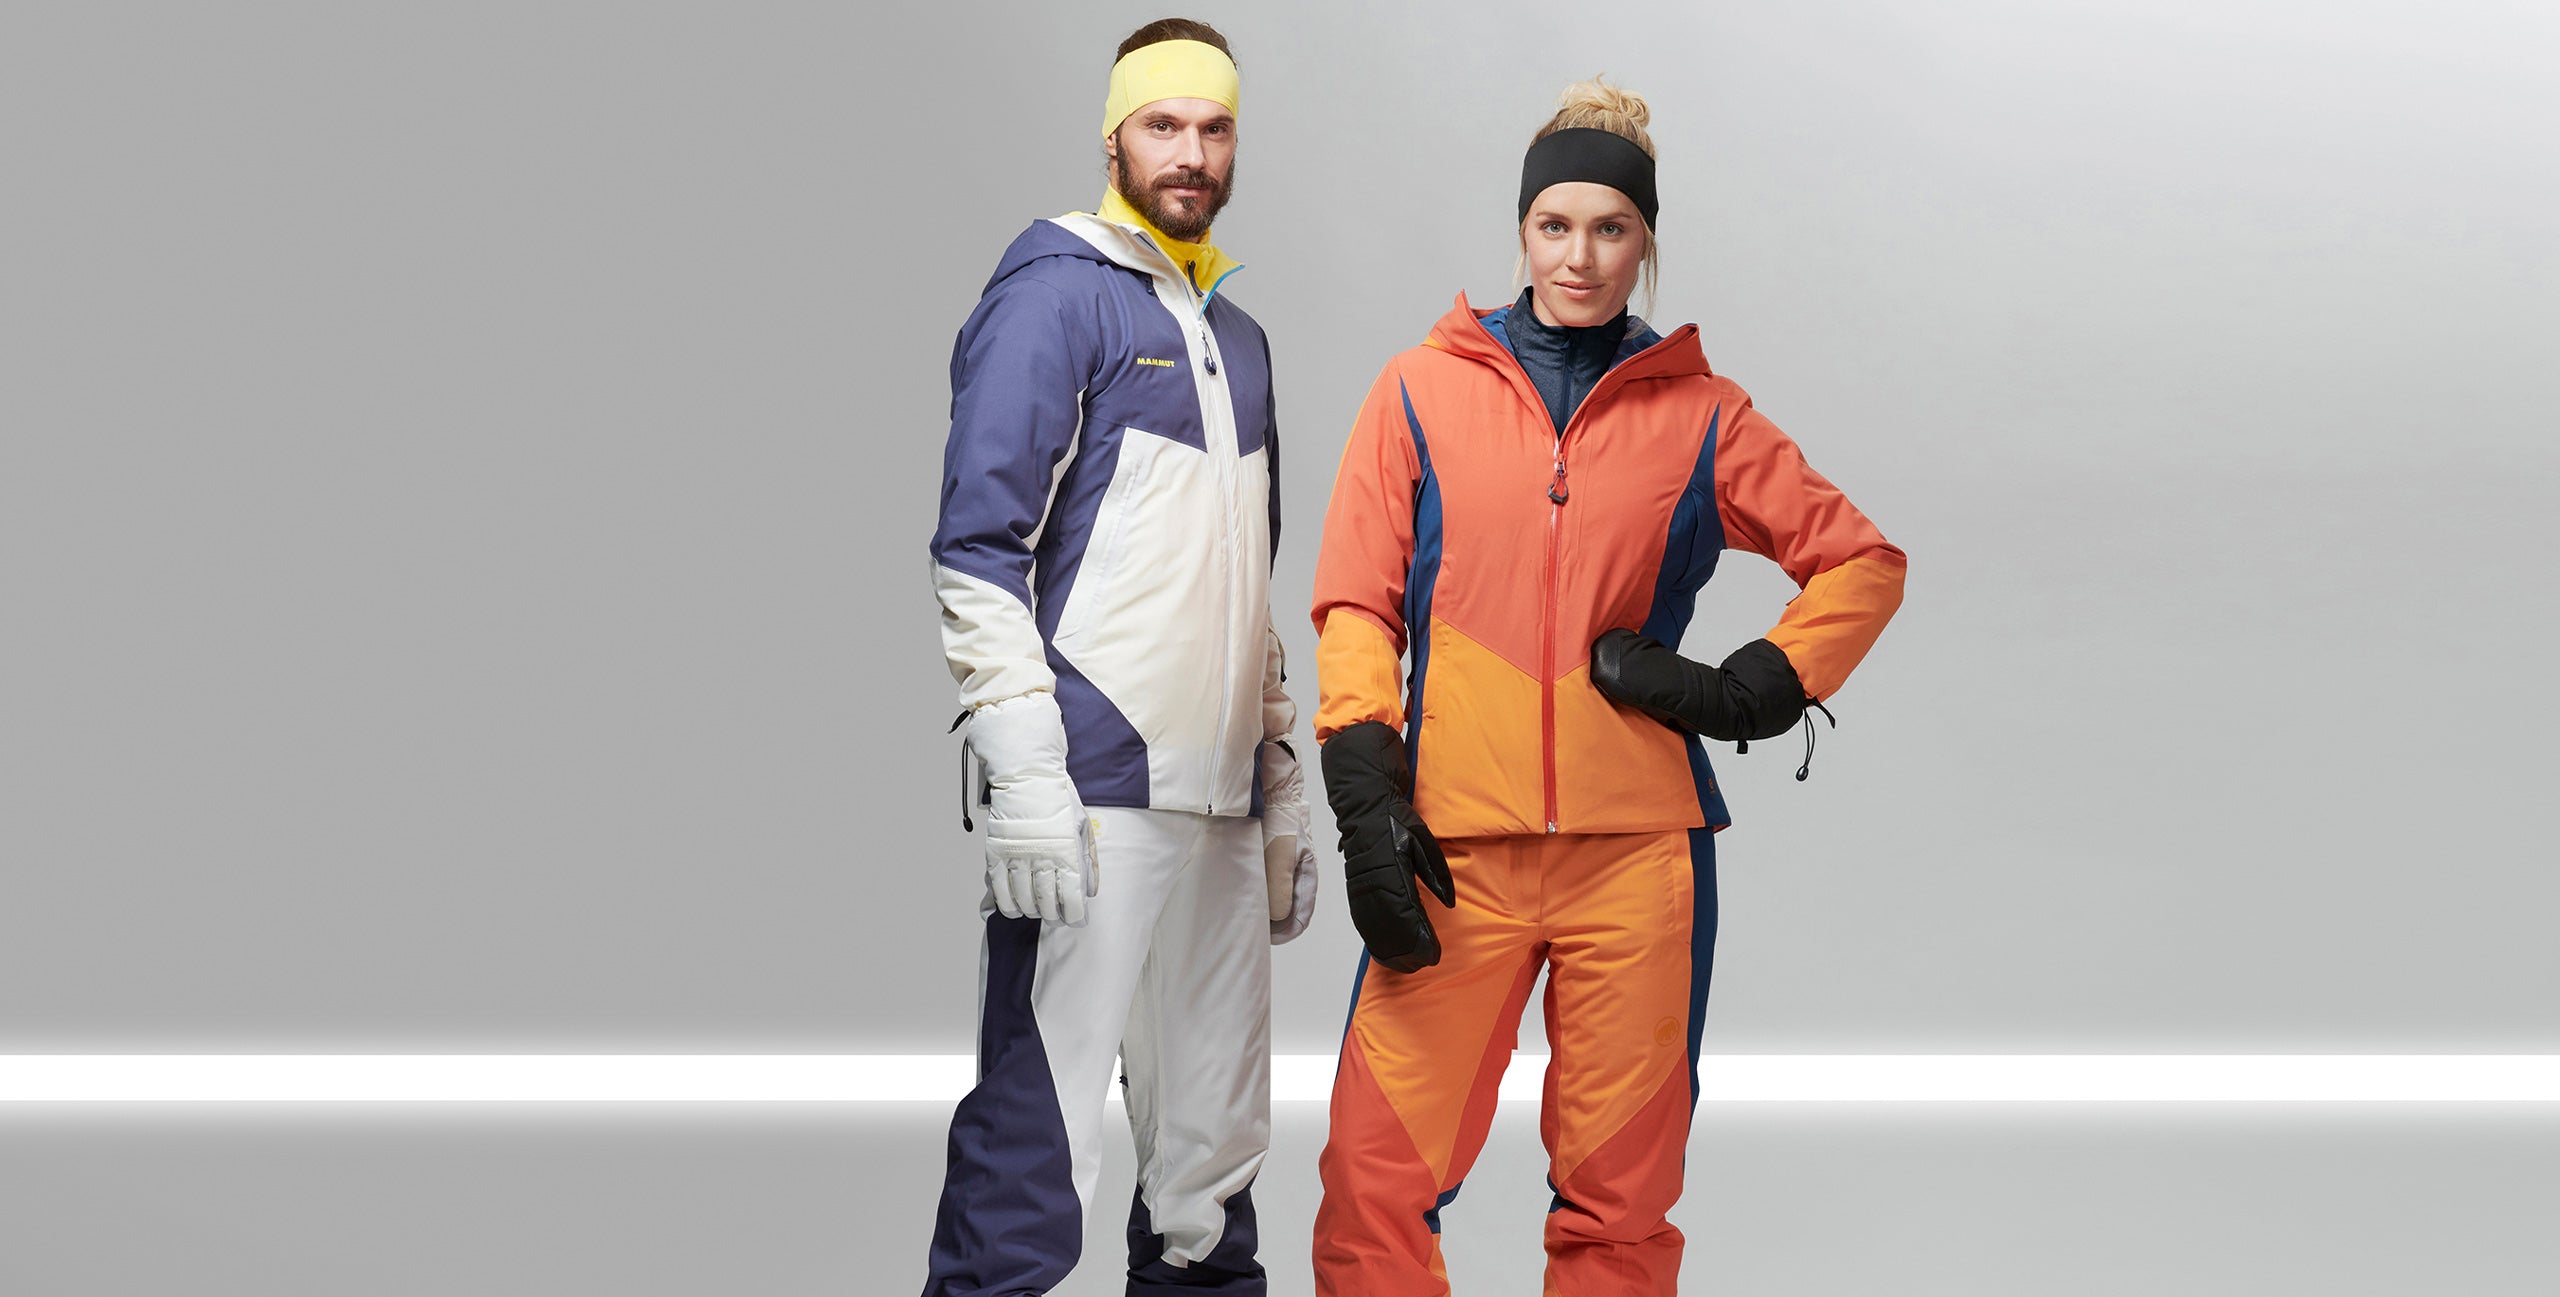 MADE FOR PERFORMANCE - NOT FOR POLLUTION: THE CASANNA SKI OUTFIT